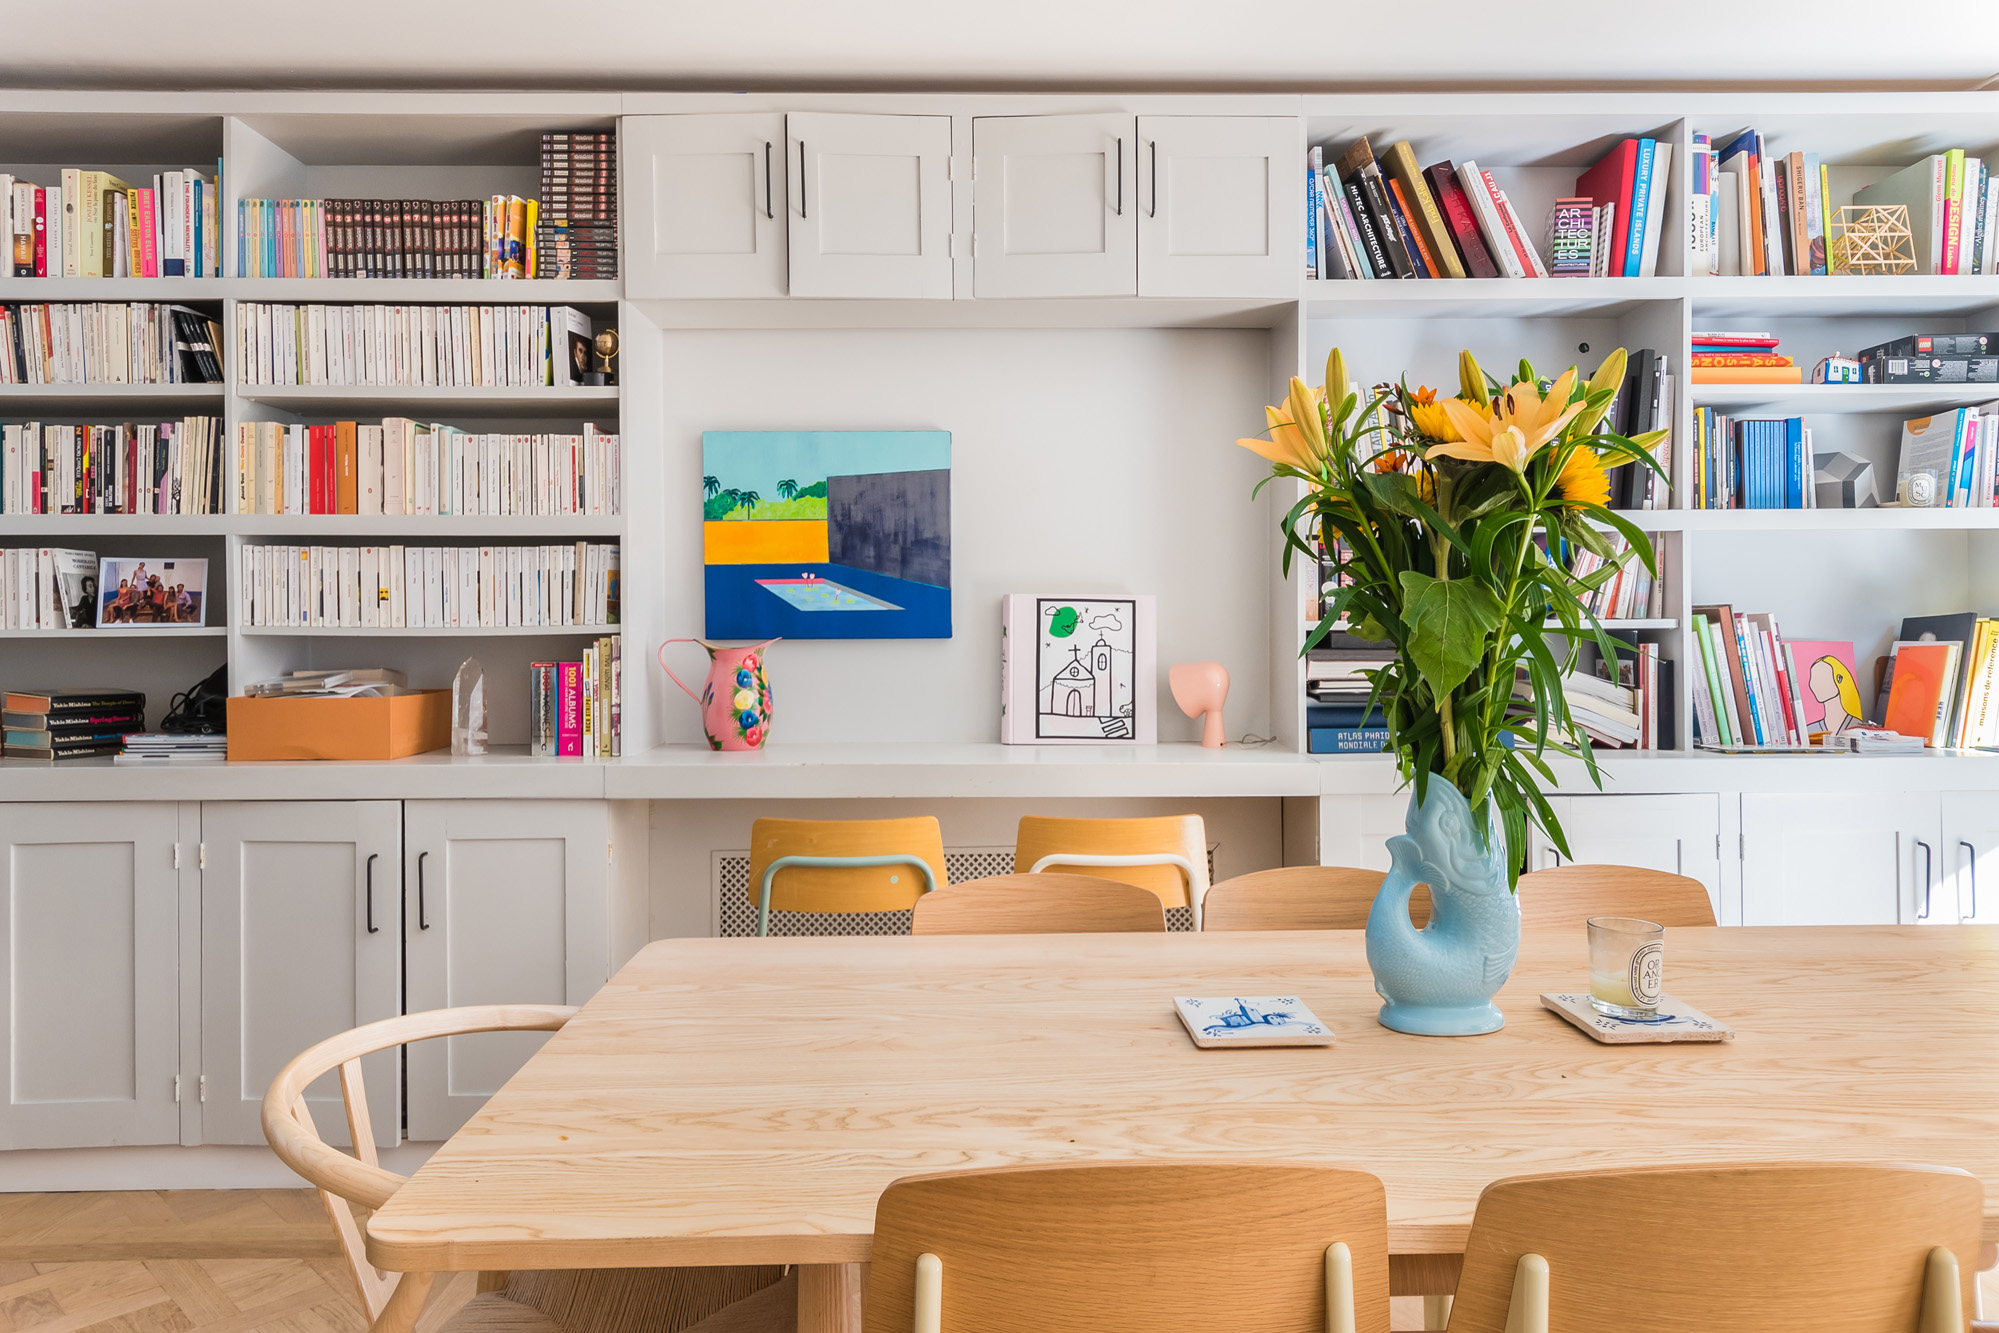 For Sale Alexander Street Notting Hill W2 modern dining table and bookcases